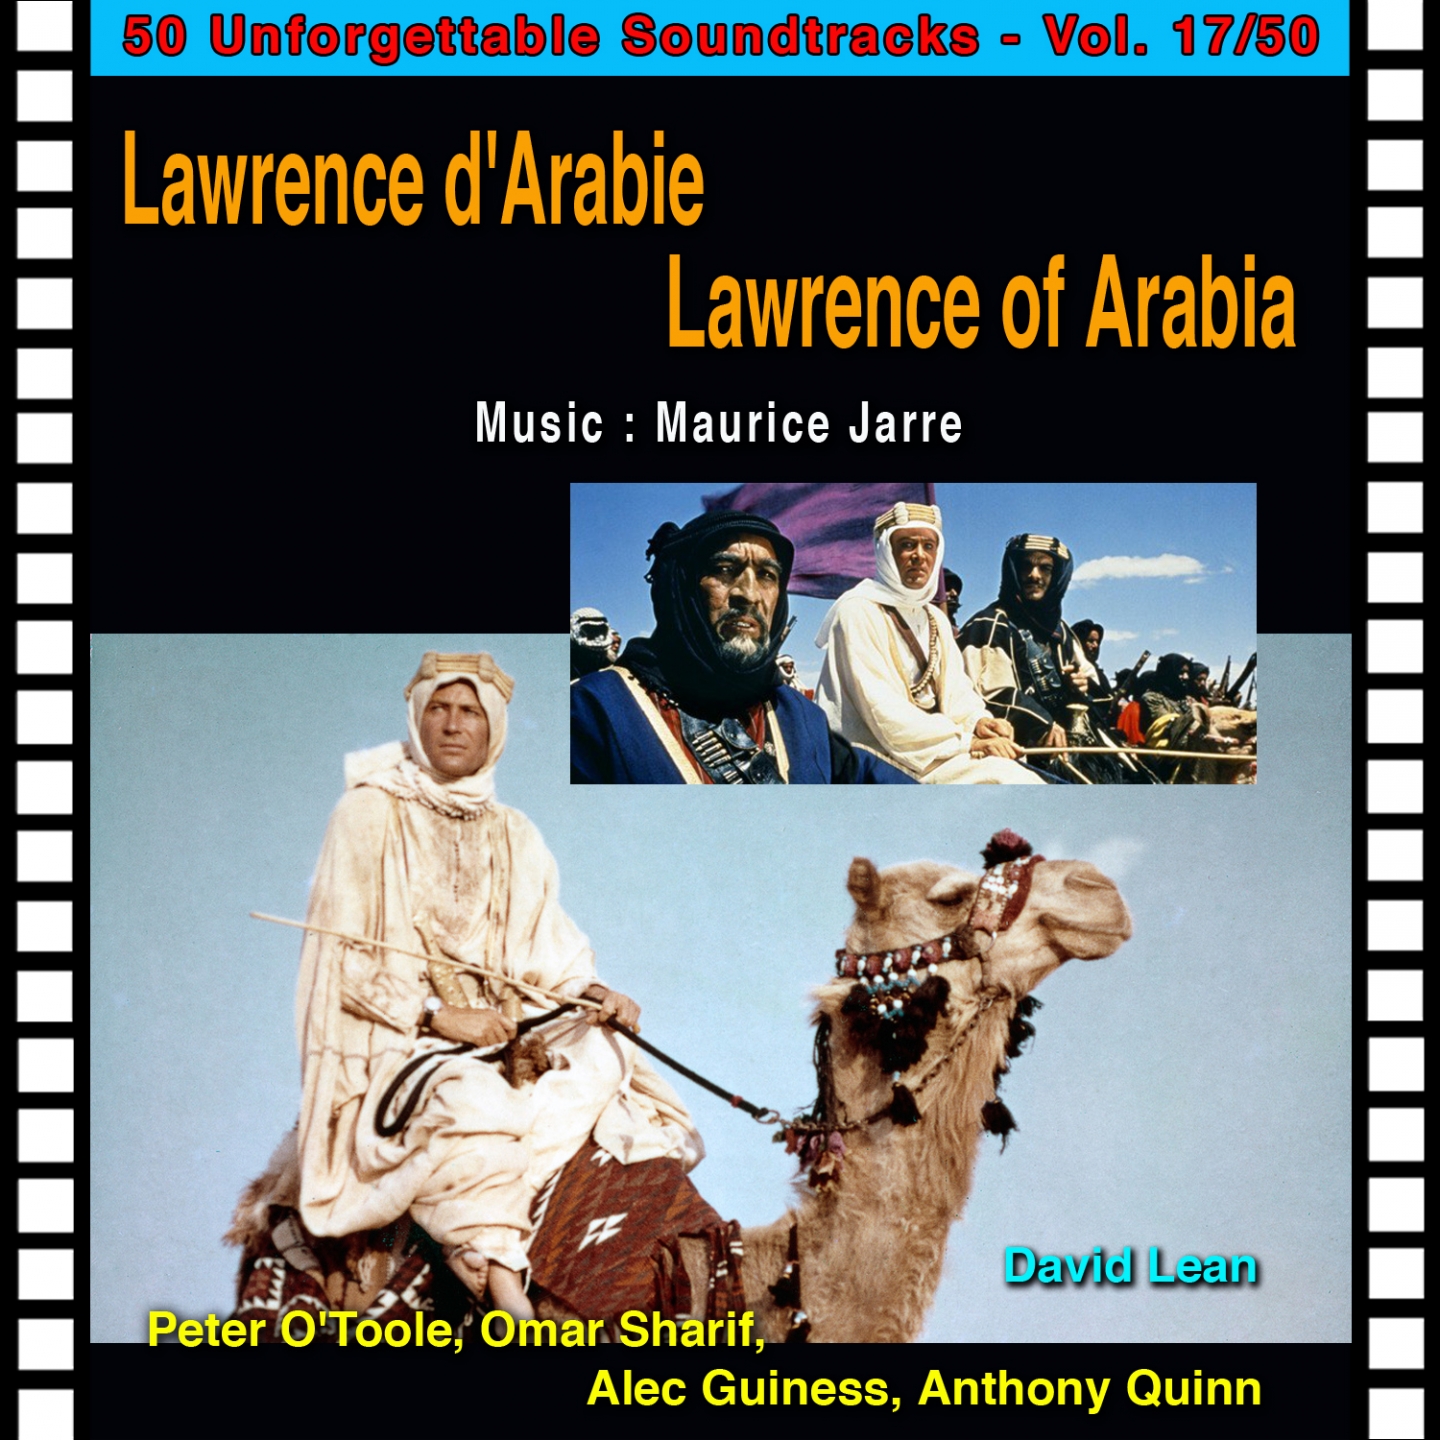 Lawrence of Arabia: Miracle (Maurice Jarre)